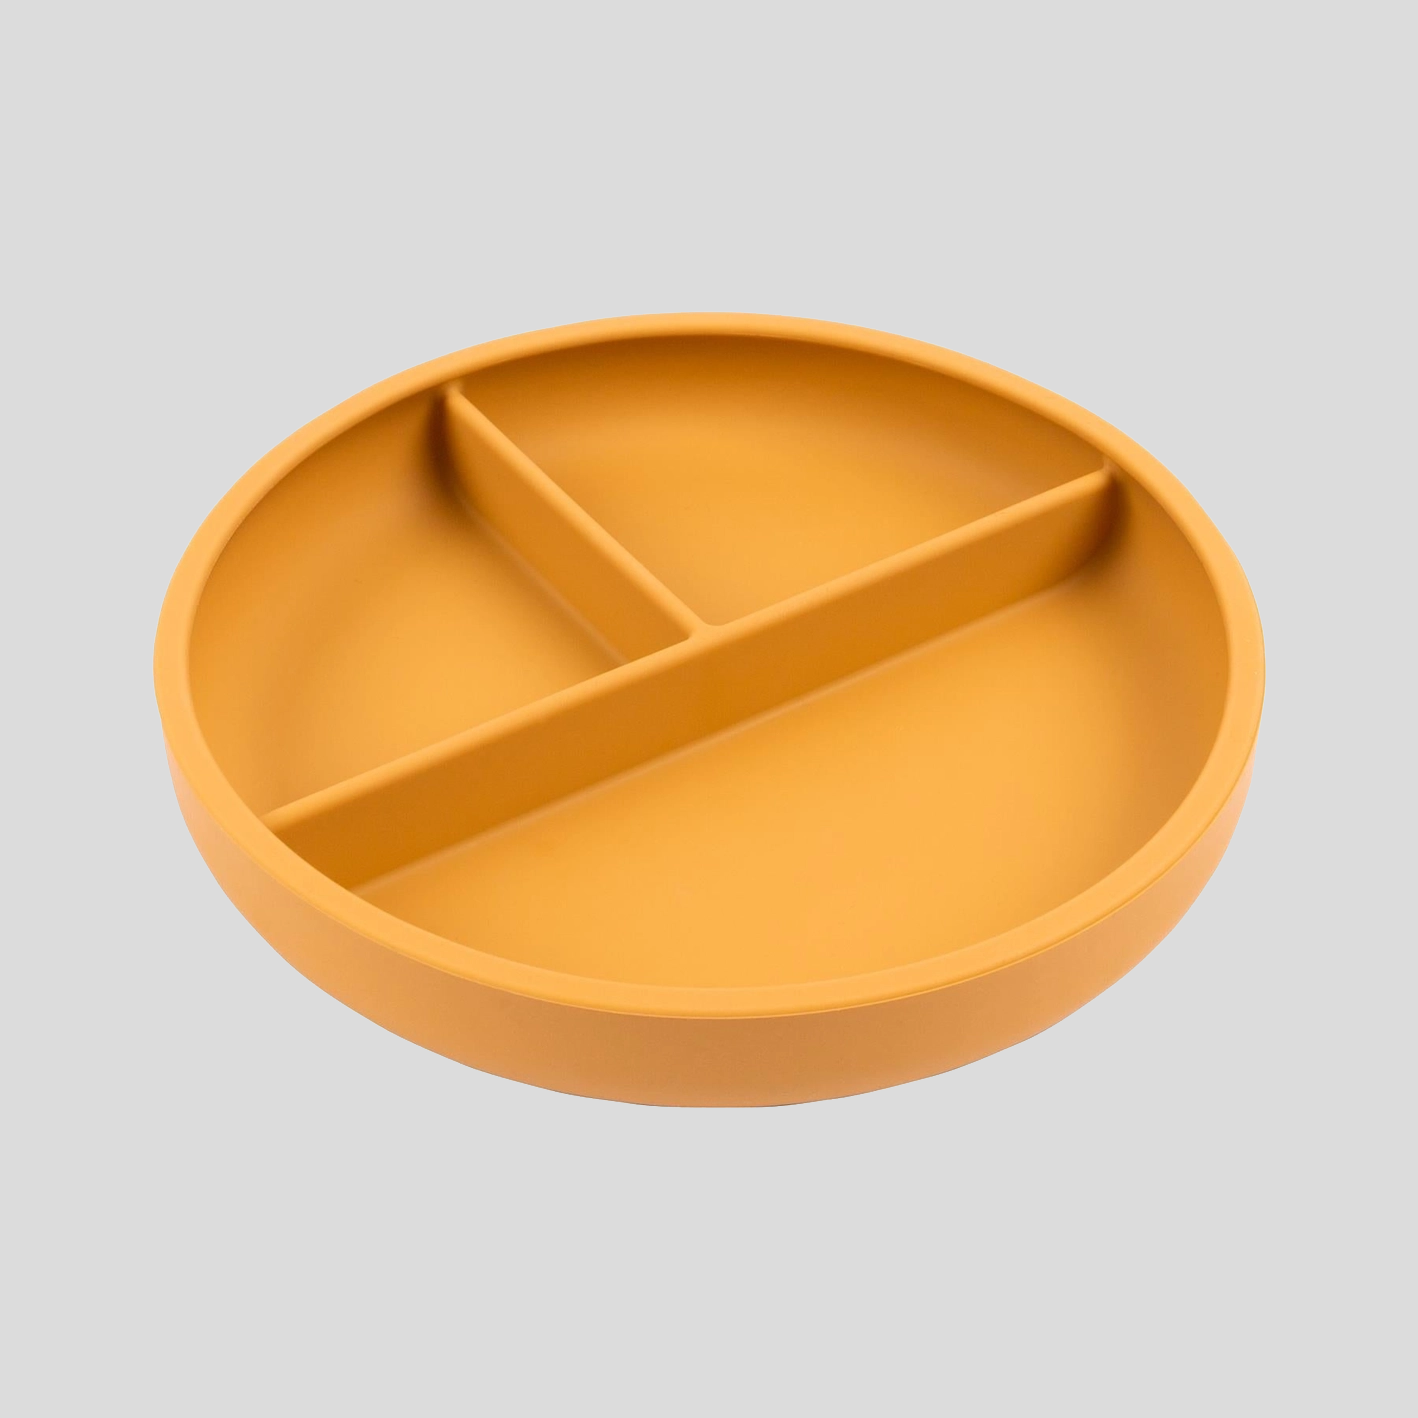 Divided Silicone Suction Plate